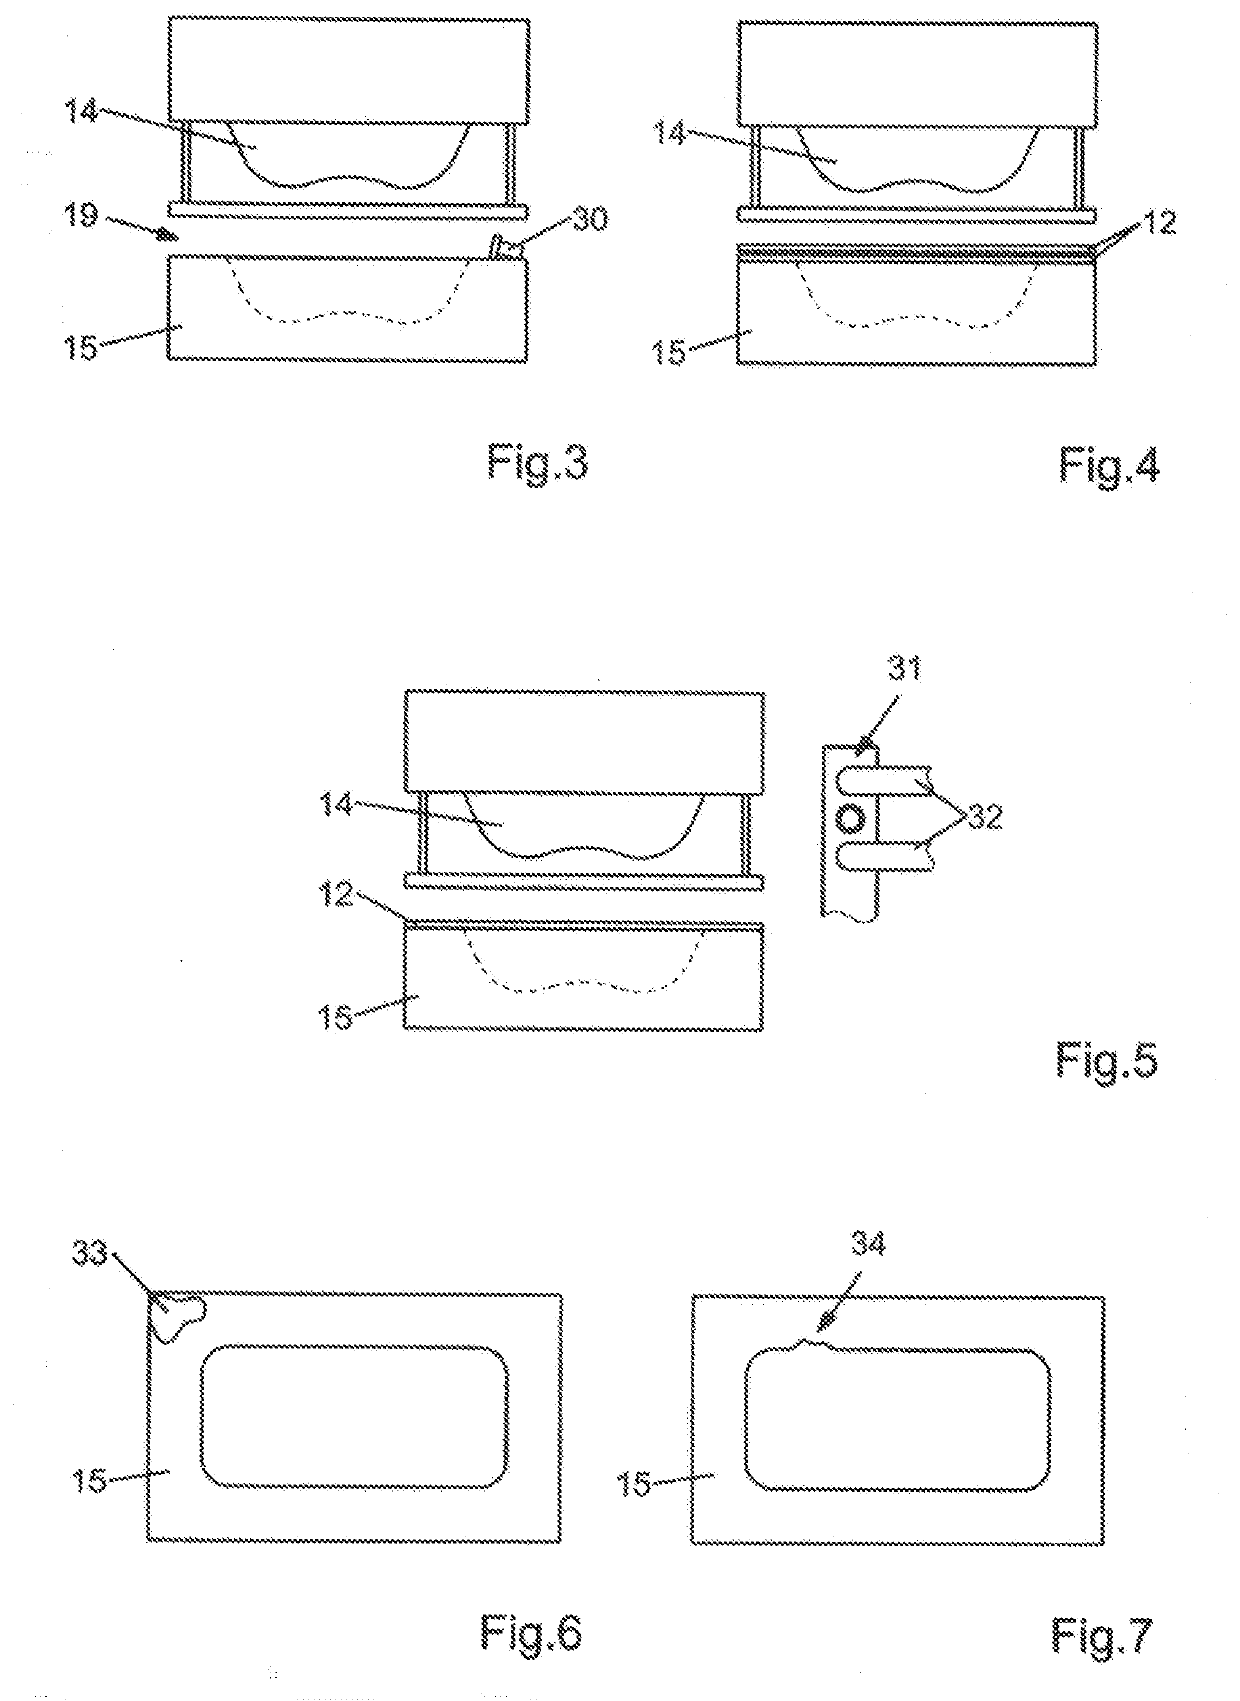 Forming or separating device, and method for operating same